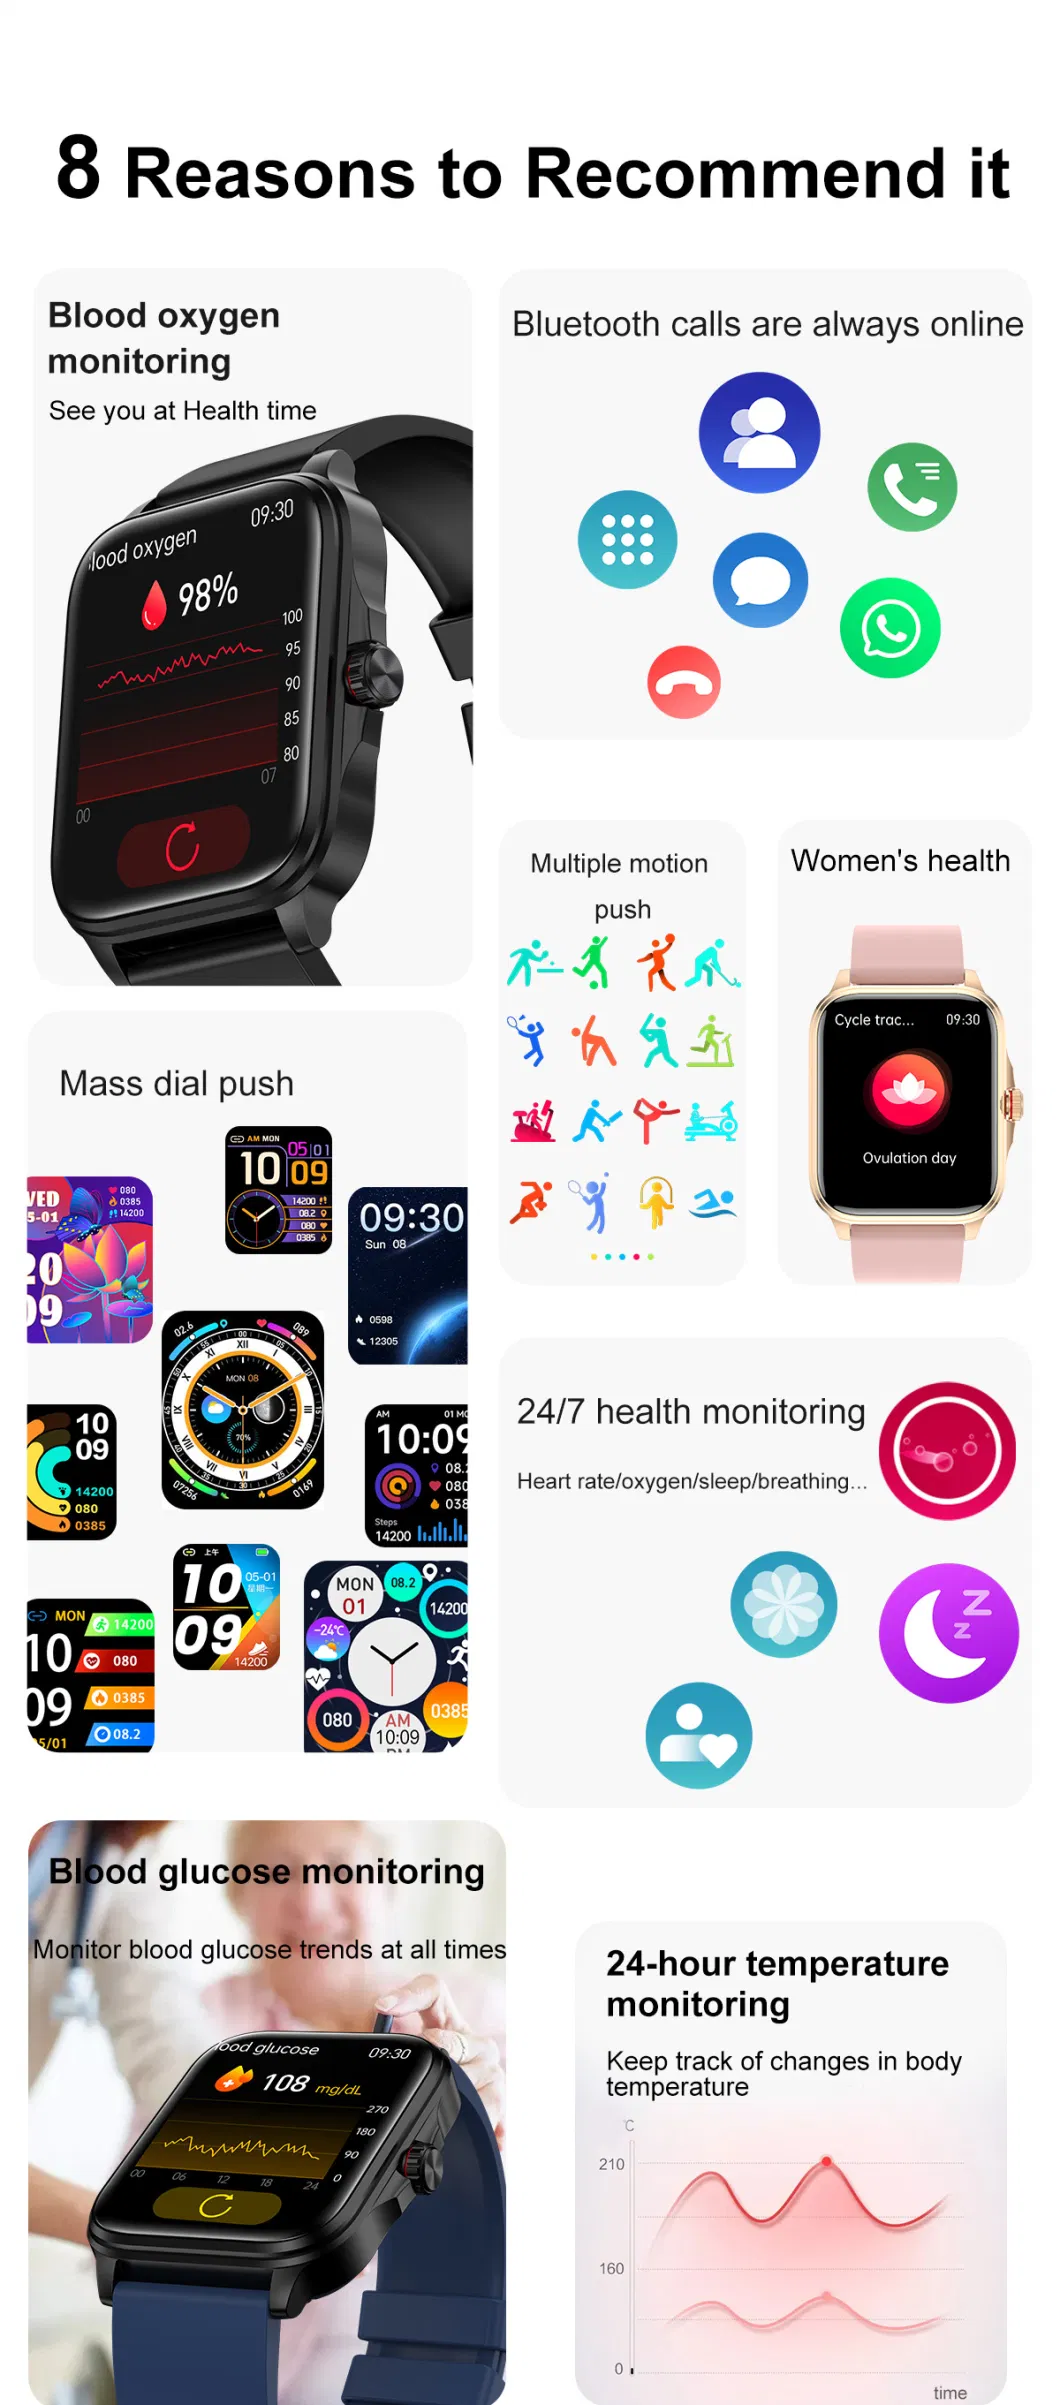 New Smartwatch Call Non-Invasive Blood Glucose Metts Hrv Heart Rate Blood Oxygen Temperature Monitor Reloj Smart Watch Kh90